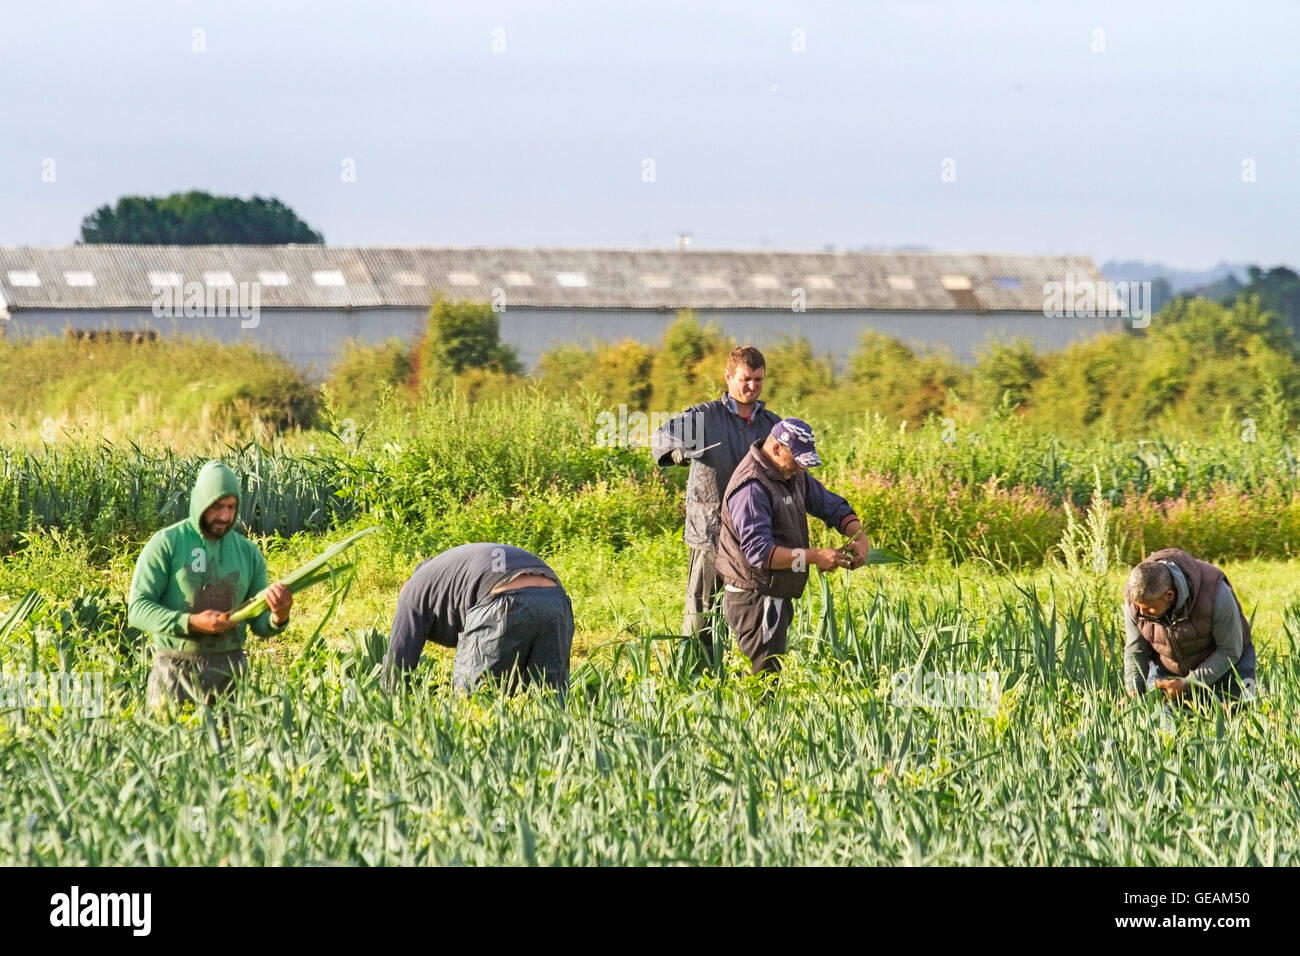 Banks, Lancashire, UK. 25th July, 2016. UK Weather: EU National Farm Workers 25-07-16. EU National farm labourers pick and cut salad leeks ready for delivery to supermarket chains throughout the UK. Migrant seasonal workers from the European Union are the backbone of Southport's salad circle. These very hard working europeans rise early to prepare the salad crops for the national grocery market. Often living and working on the farm, many are now worried 'Post Brexit' about their future employment in the UK's farming sector. Credit:  Cernan Elias/Alamy Live News Stock Photo